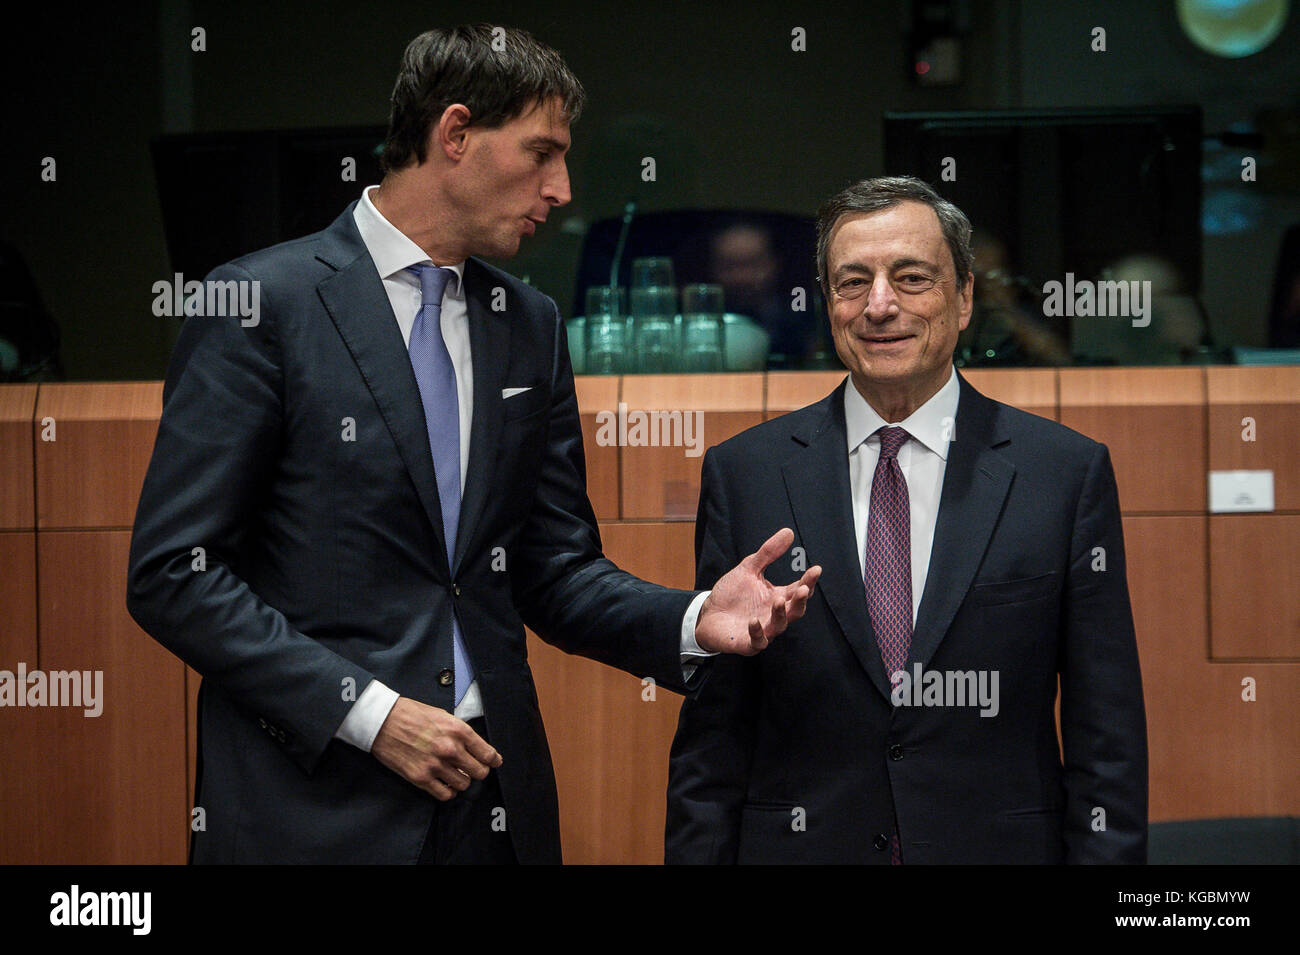 Brussels, Bxl, Belgium. 6th Nov, 2017. President of the European Central Bank Mario Draghi (R) and Dutch Finance Minister Wopke Hoekstra (L) at the start of Eurogroup, finance ministers of the single currency EURO zone meeting at EU headquarters in Brussels, Belgium on 06.11.2017 by Wiktor Dabkowski Credit: Wiktor Dabkowski/ZUMA Wire/Alamy Live News Stock Photo